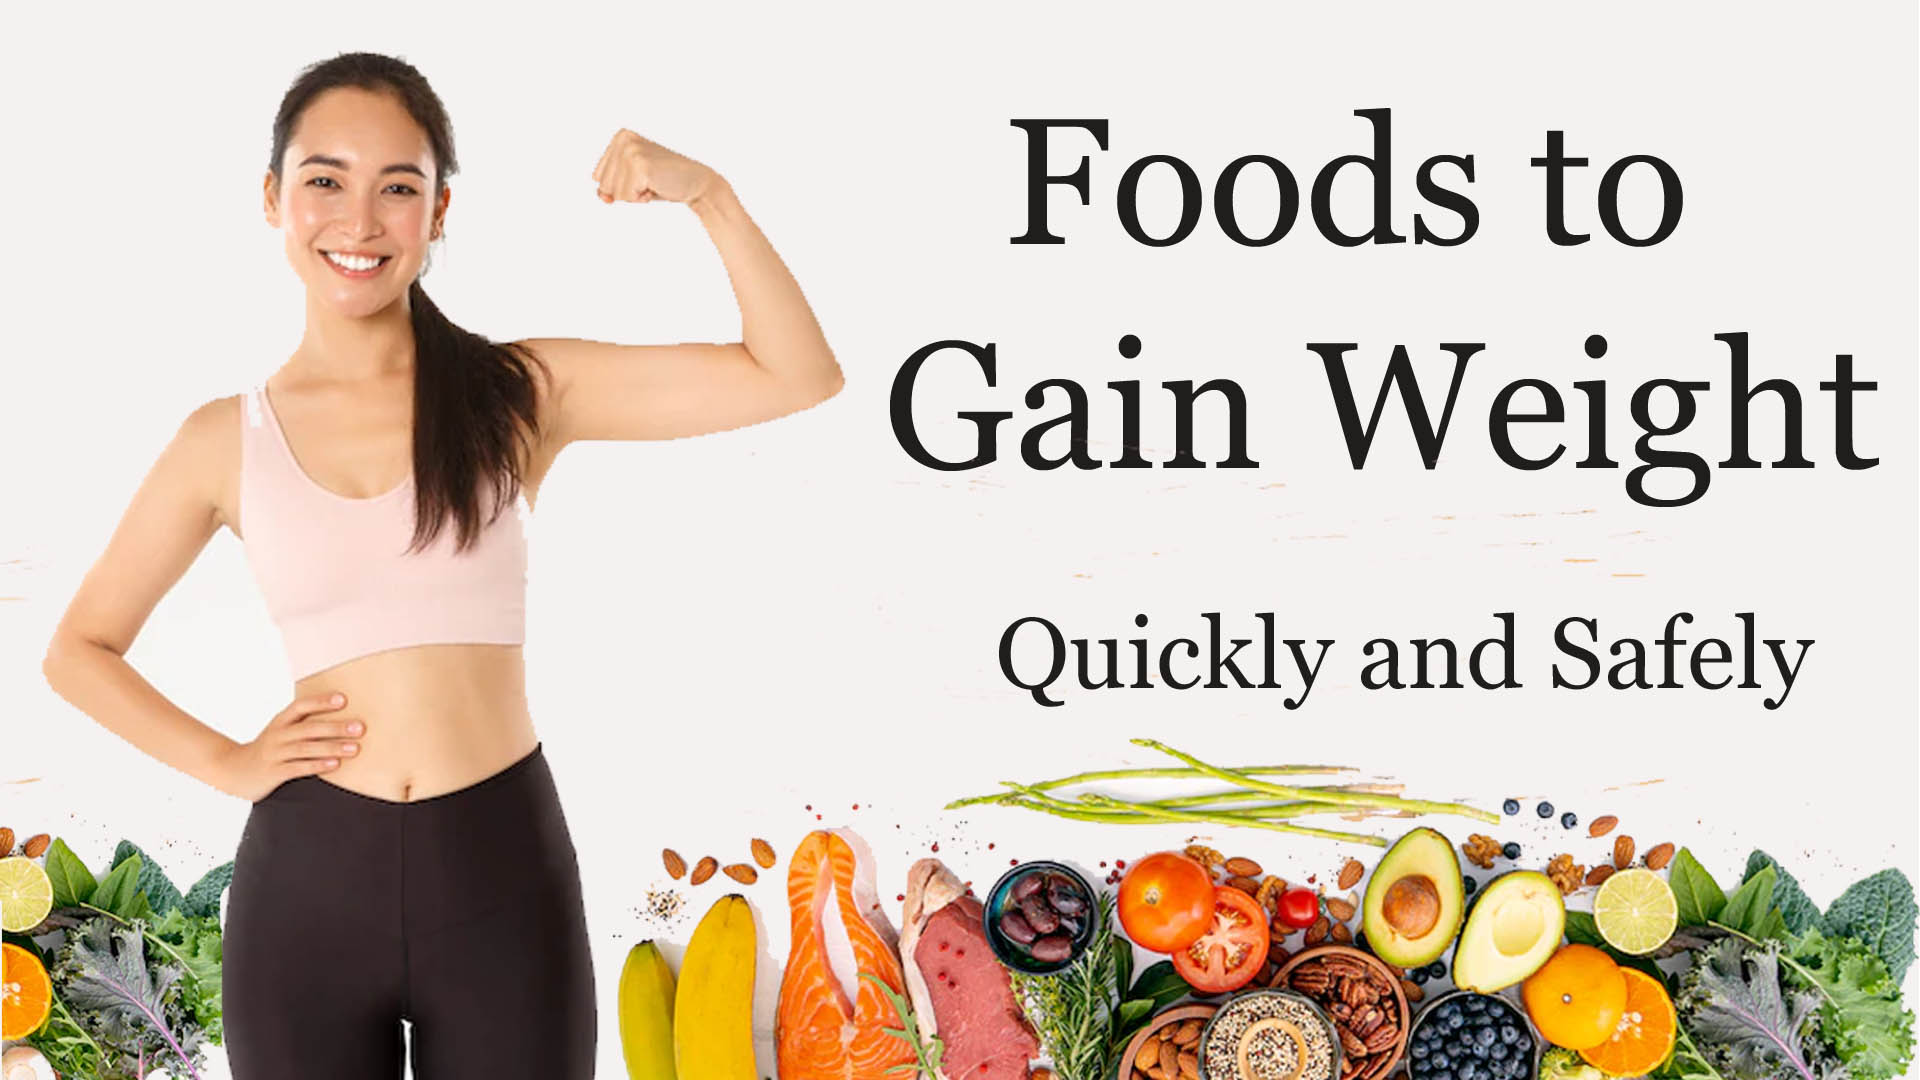 What are the Foods to Gain Weight Quickly and Safely?